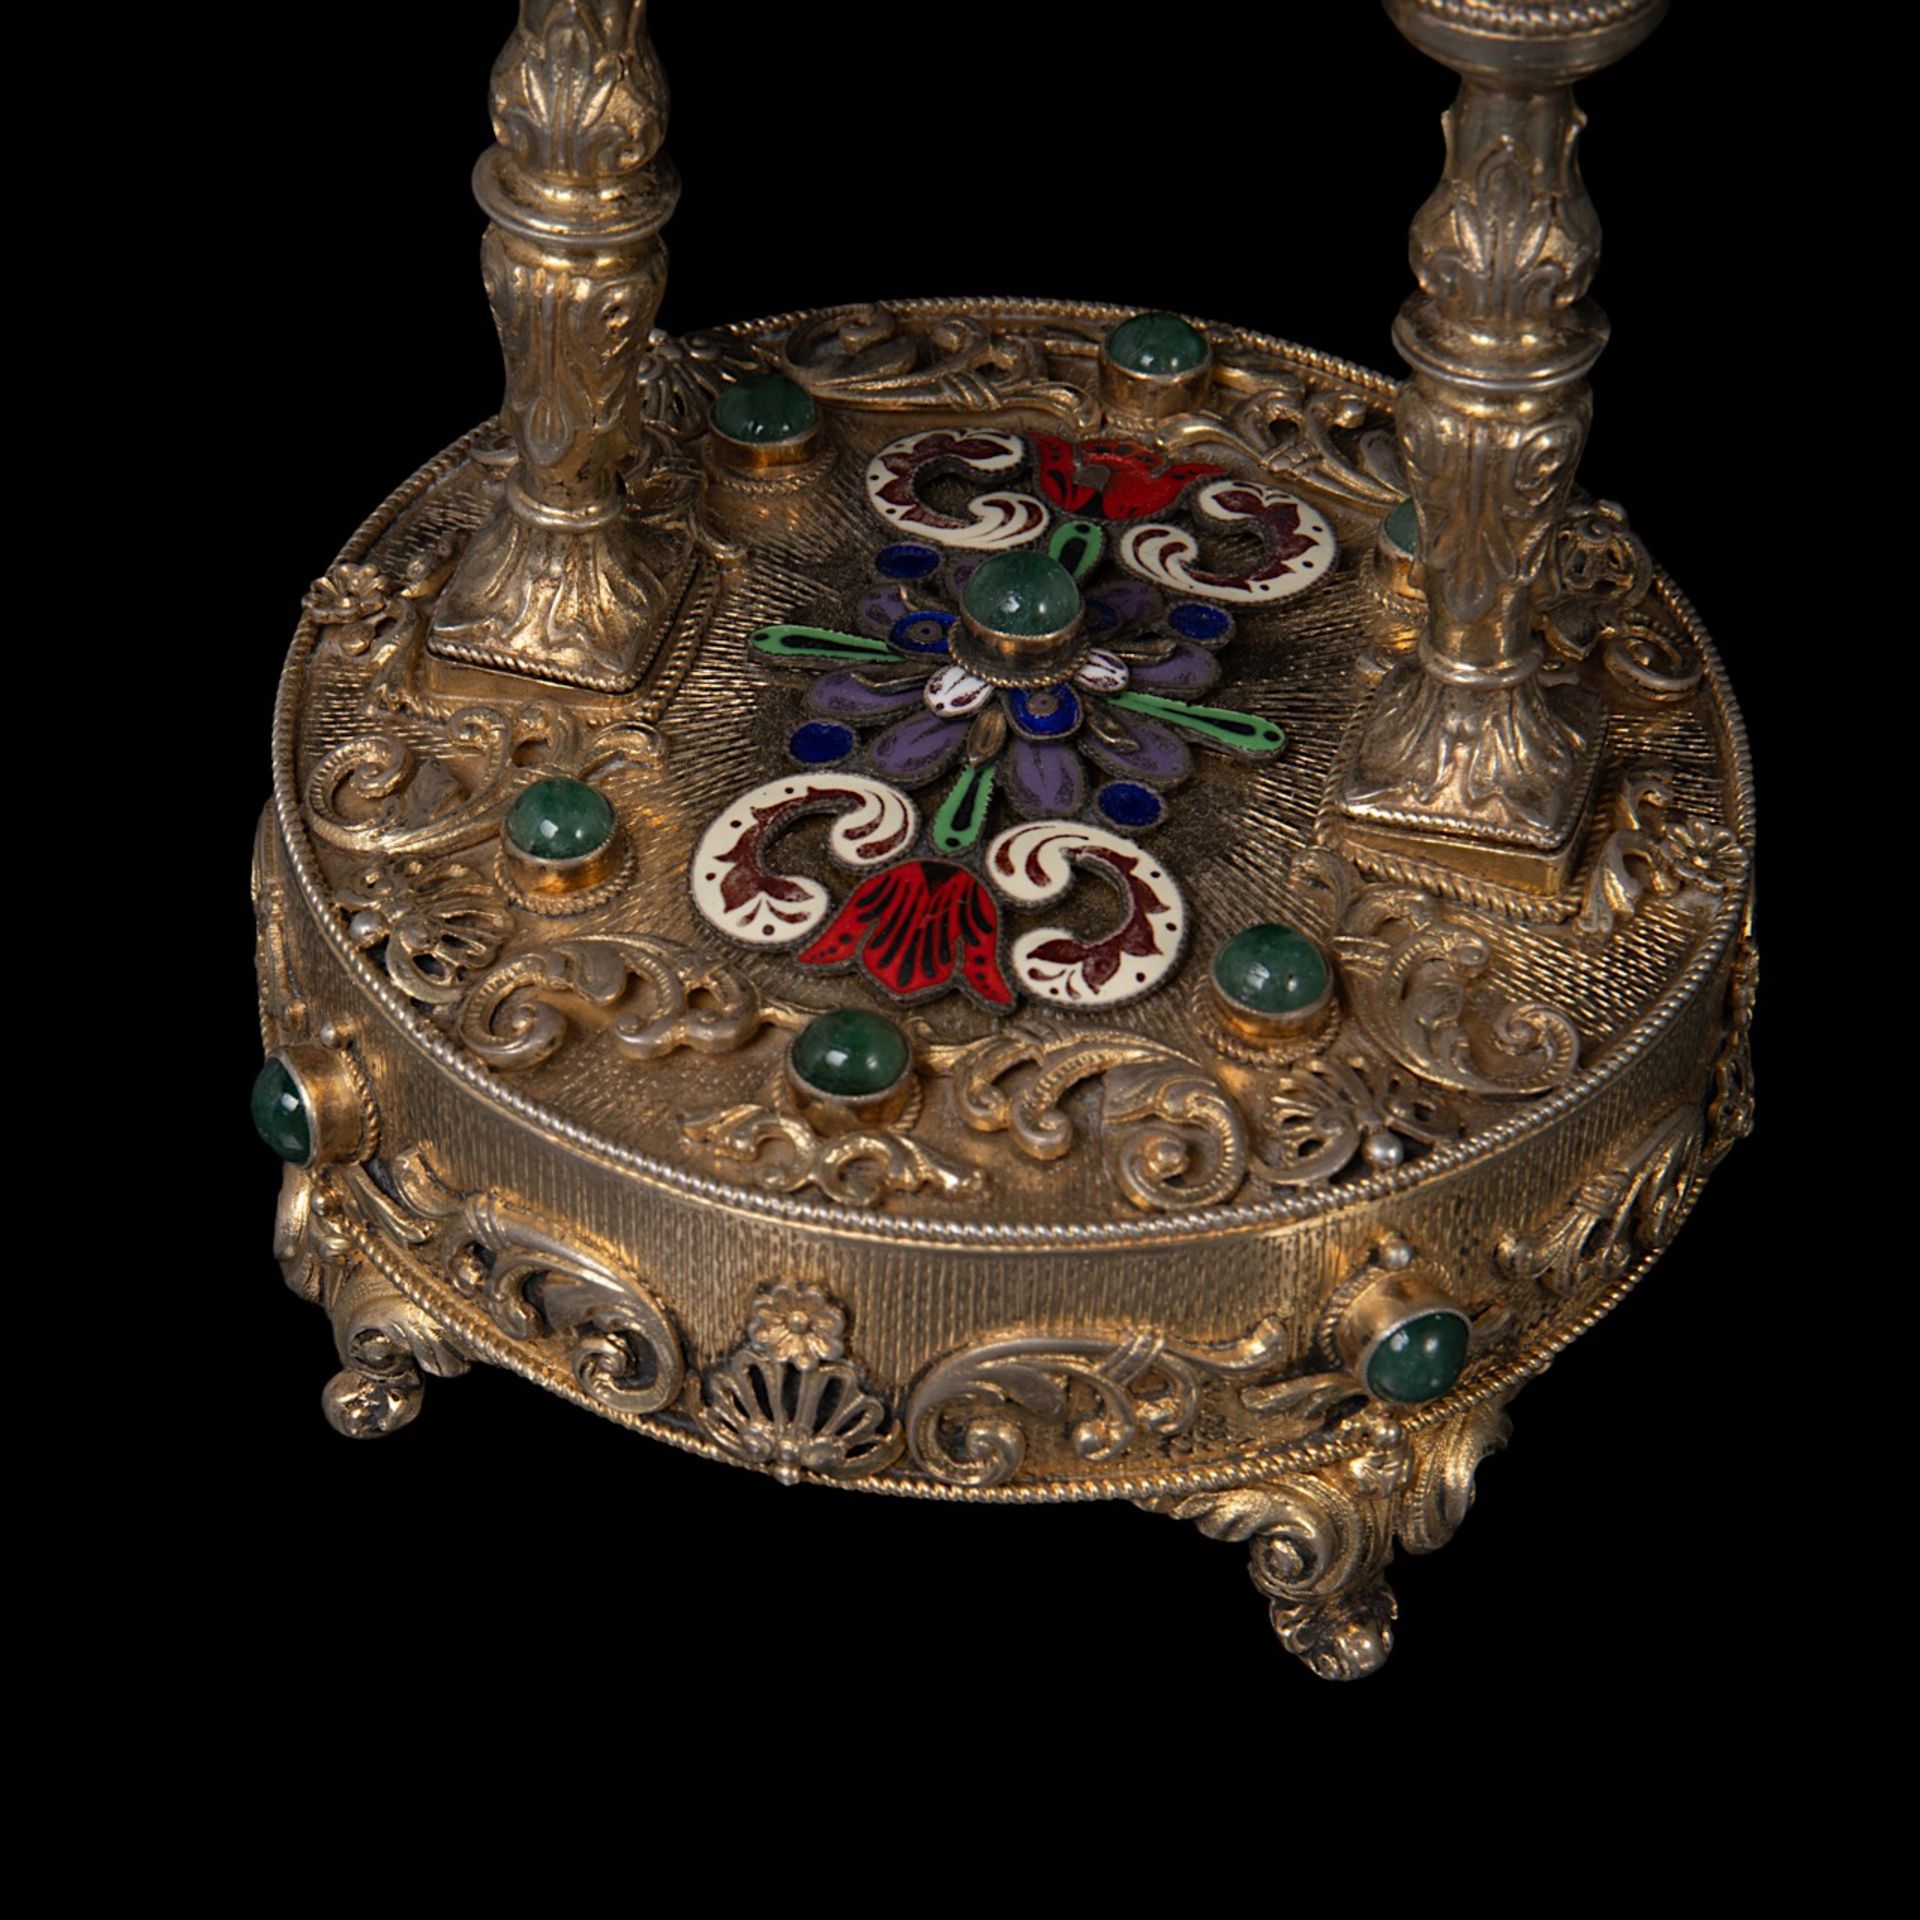 An Austrian gilt-silver and enamel clock with music box, decorated with semi-precious stones and mot - Image 6 of 7